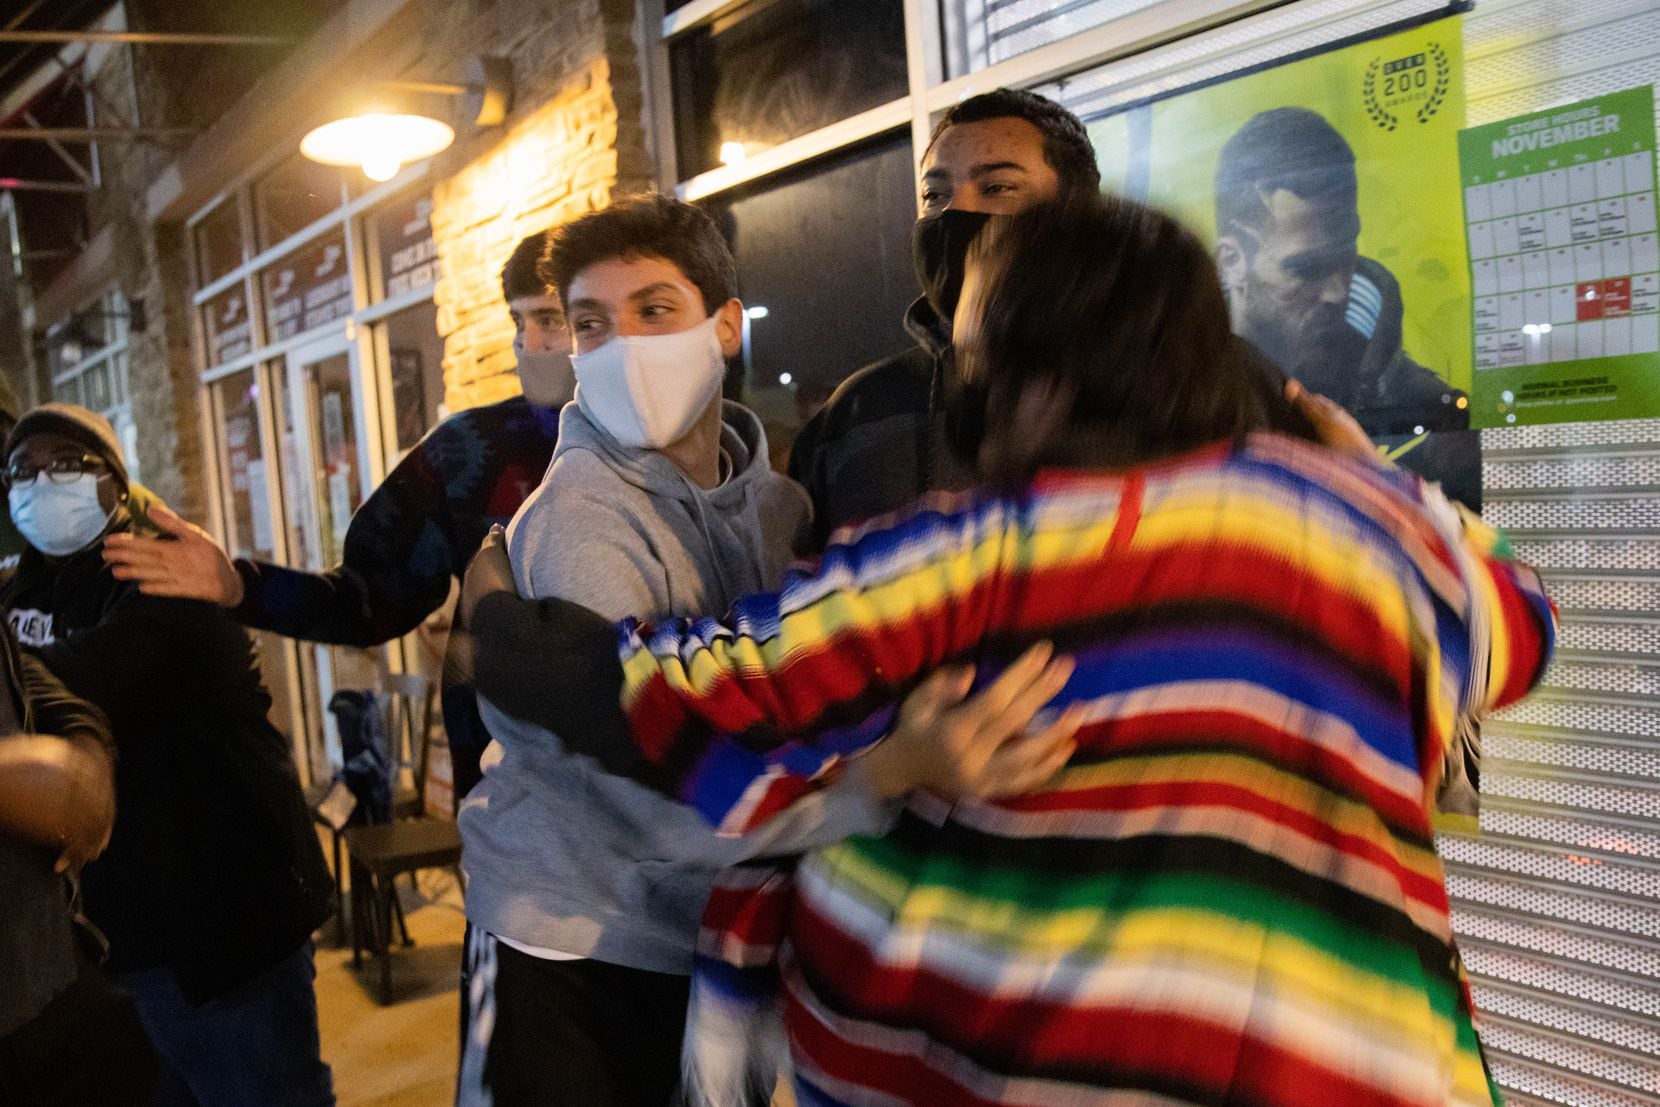 Left to right: George Garrido, Brandon Lopez, and Pedro Collazo hug each other after finding out that the new Xbox and PlayStations are in stock at Timber Creek Crossing GameStop.